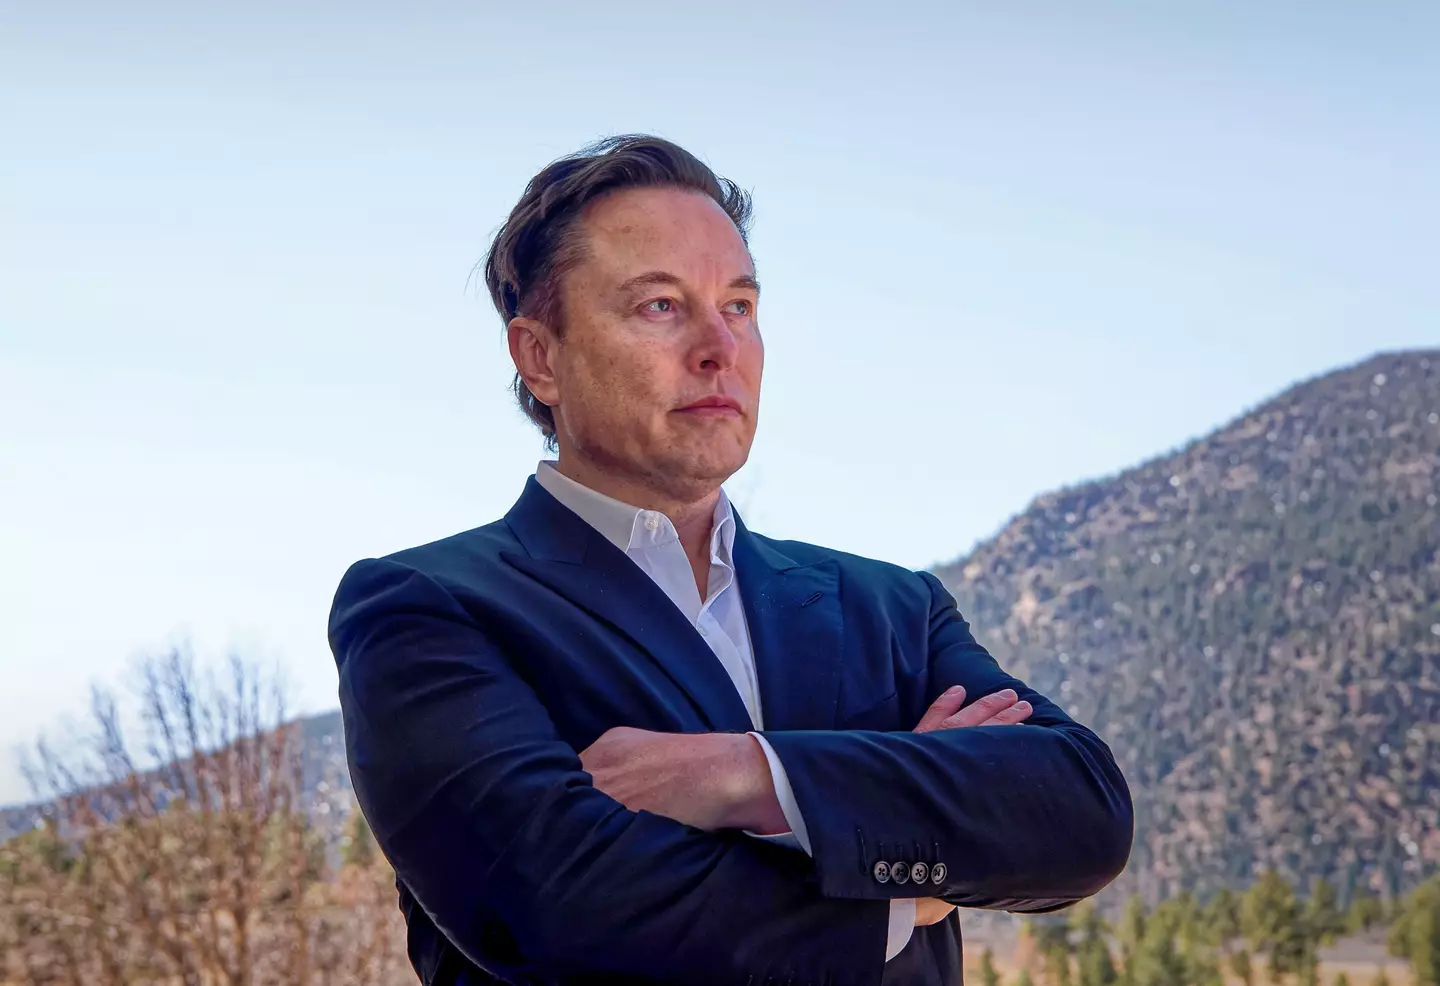 Twitter CEO Elon Musk will be stepping down, and MrBeast has already asked for his job.